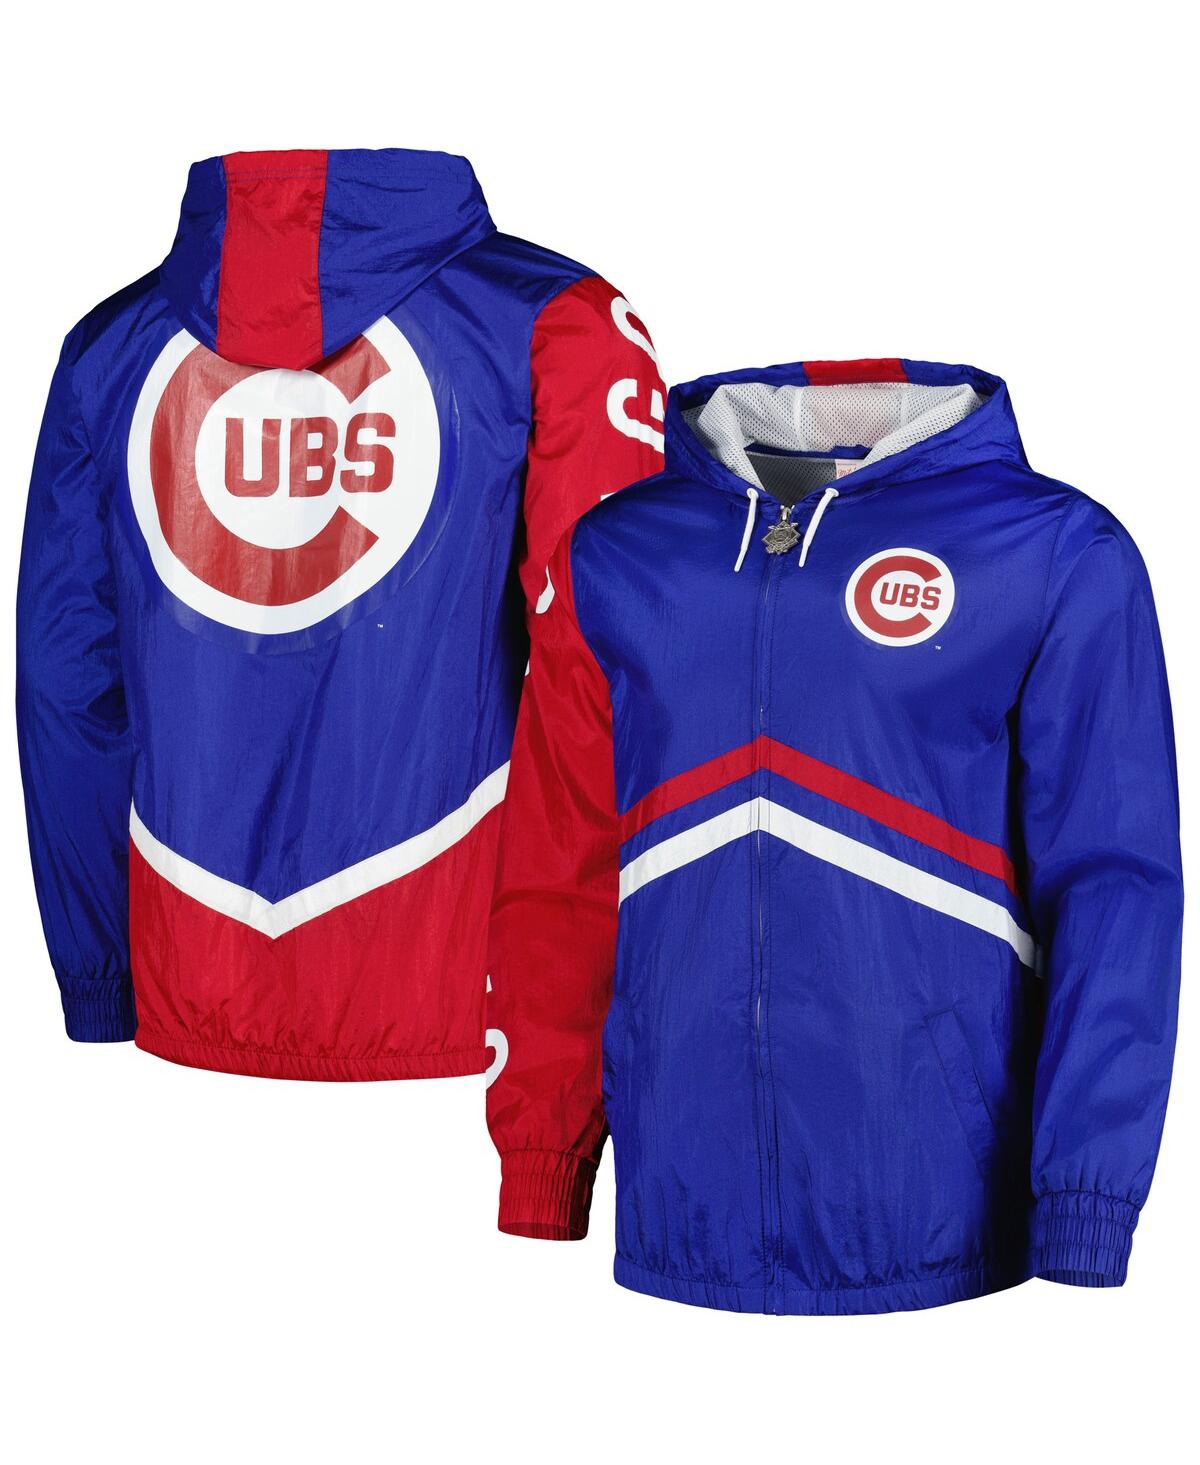 Men's Mitchell & Ness Royal Chicago Cubs Undeniable Full-Zip Hoodie Windbreaker Jacket - Royal